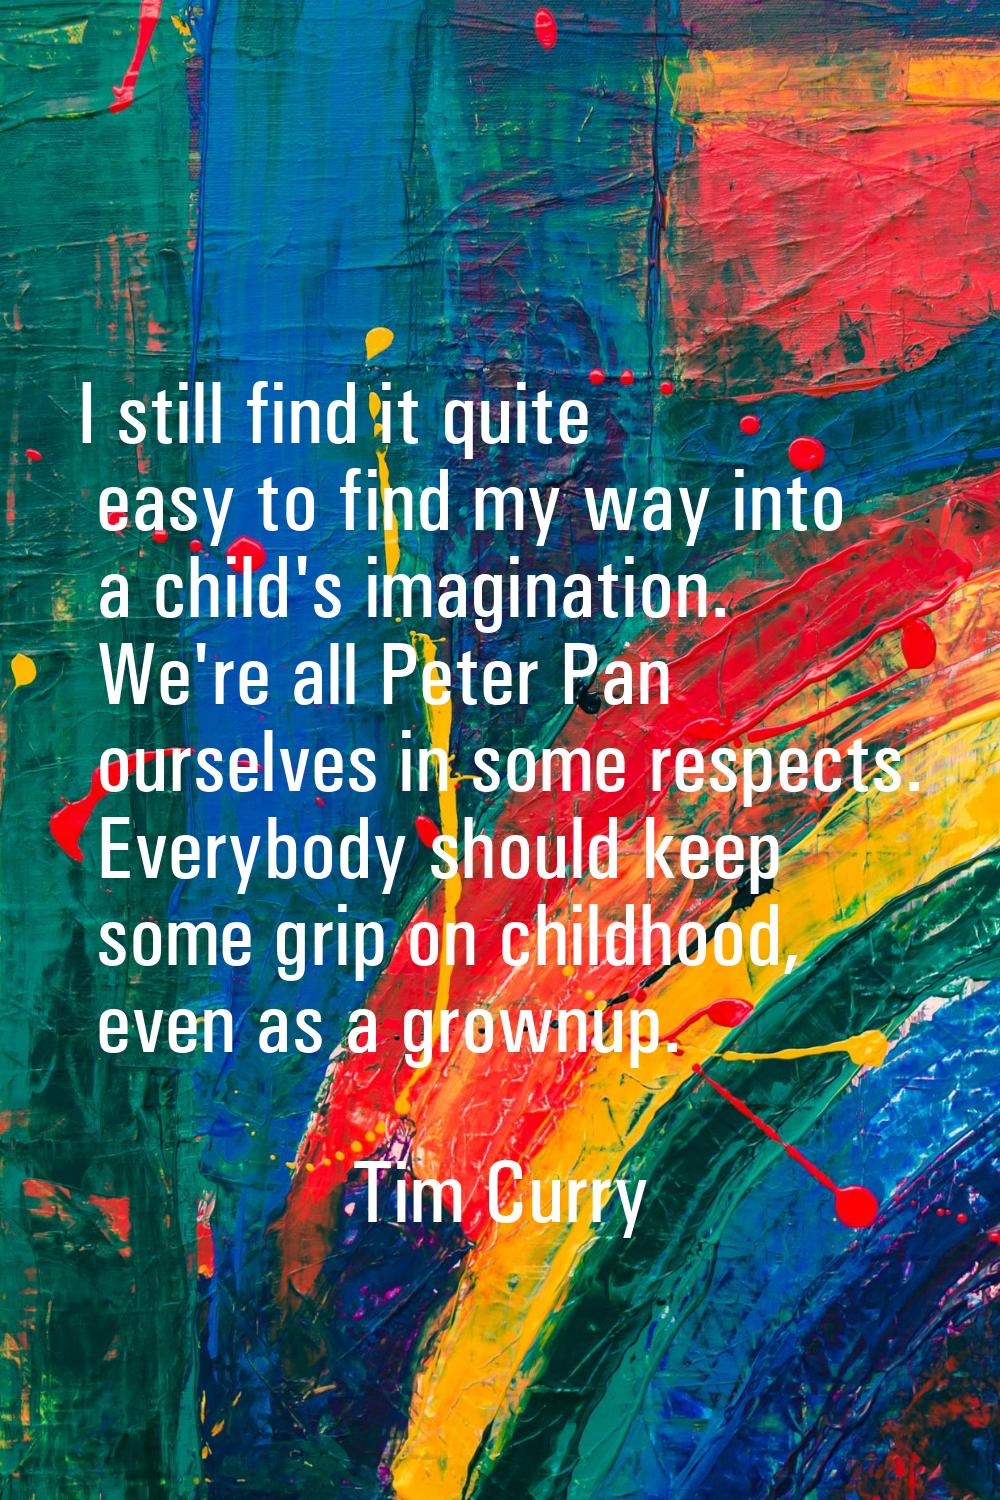 I still find it quite easy to find my way into a child's imagination. We're all Peter Pan ourselves